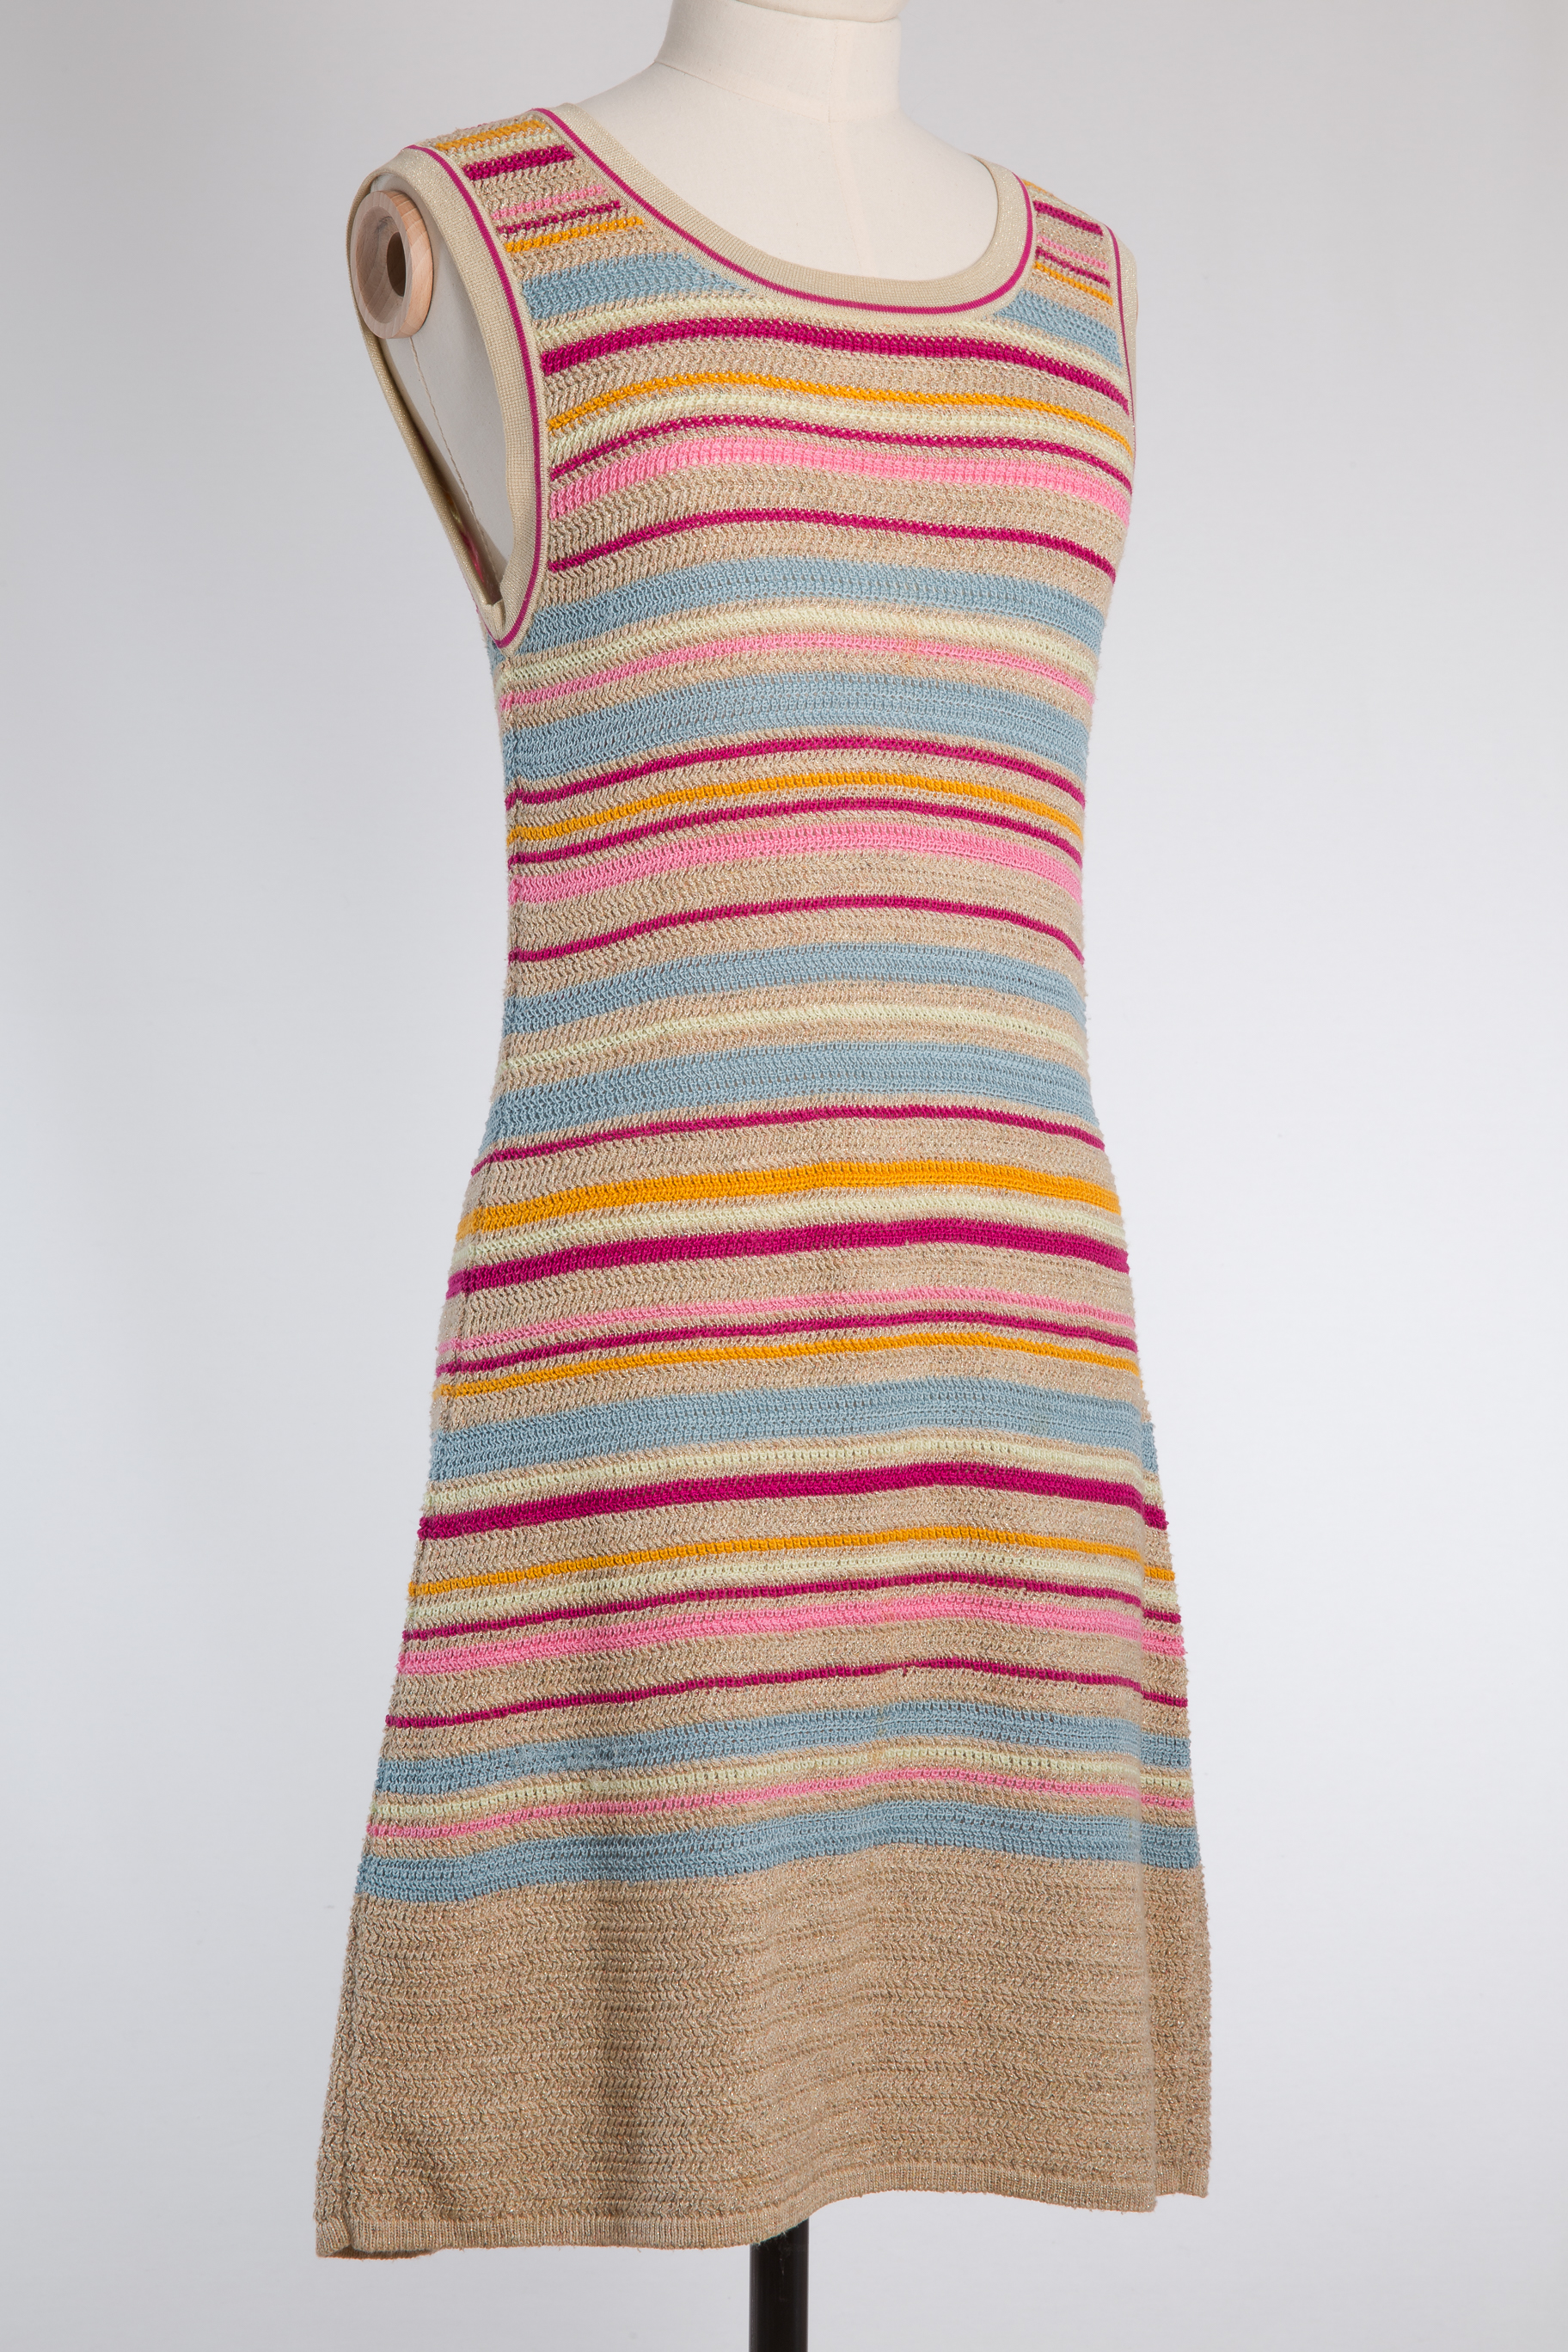 Chanel Knit Dress, FR36 - Huntessa Luxury Online Consignment Boutique